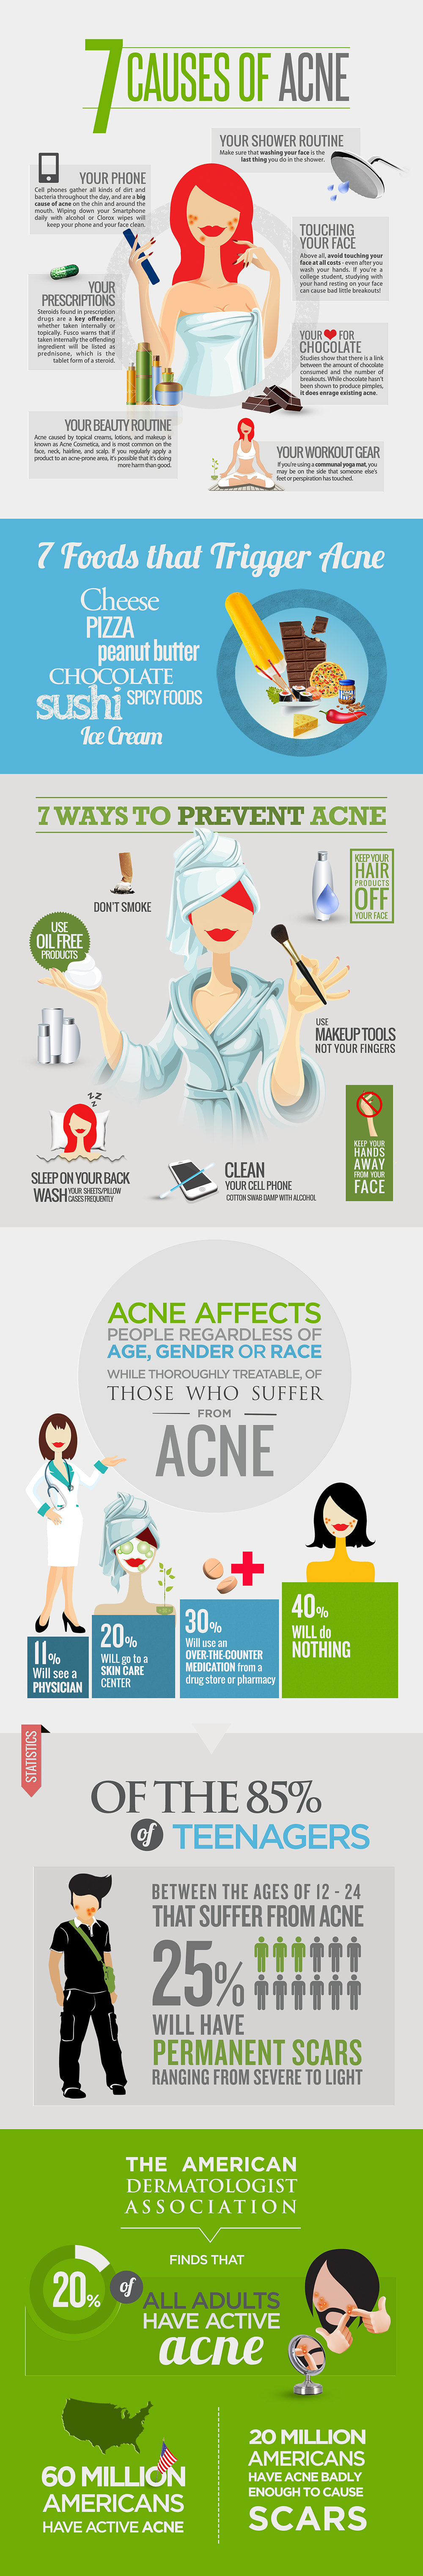 7 Causes and Foods That can Trigger your Acne